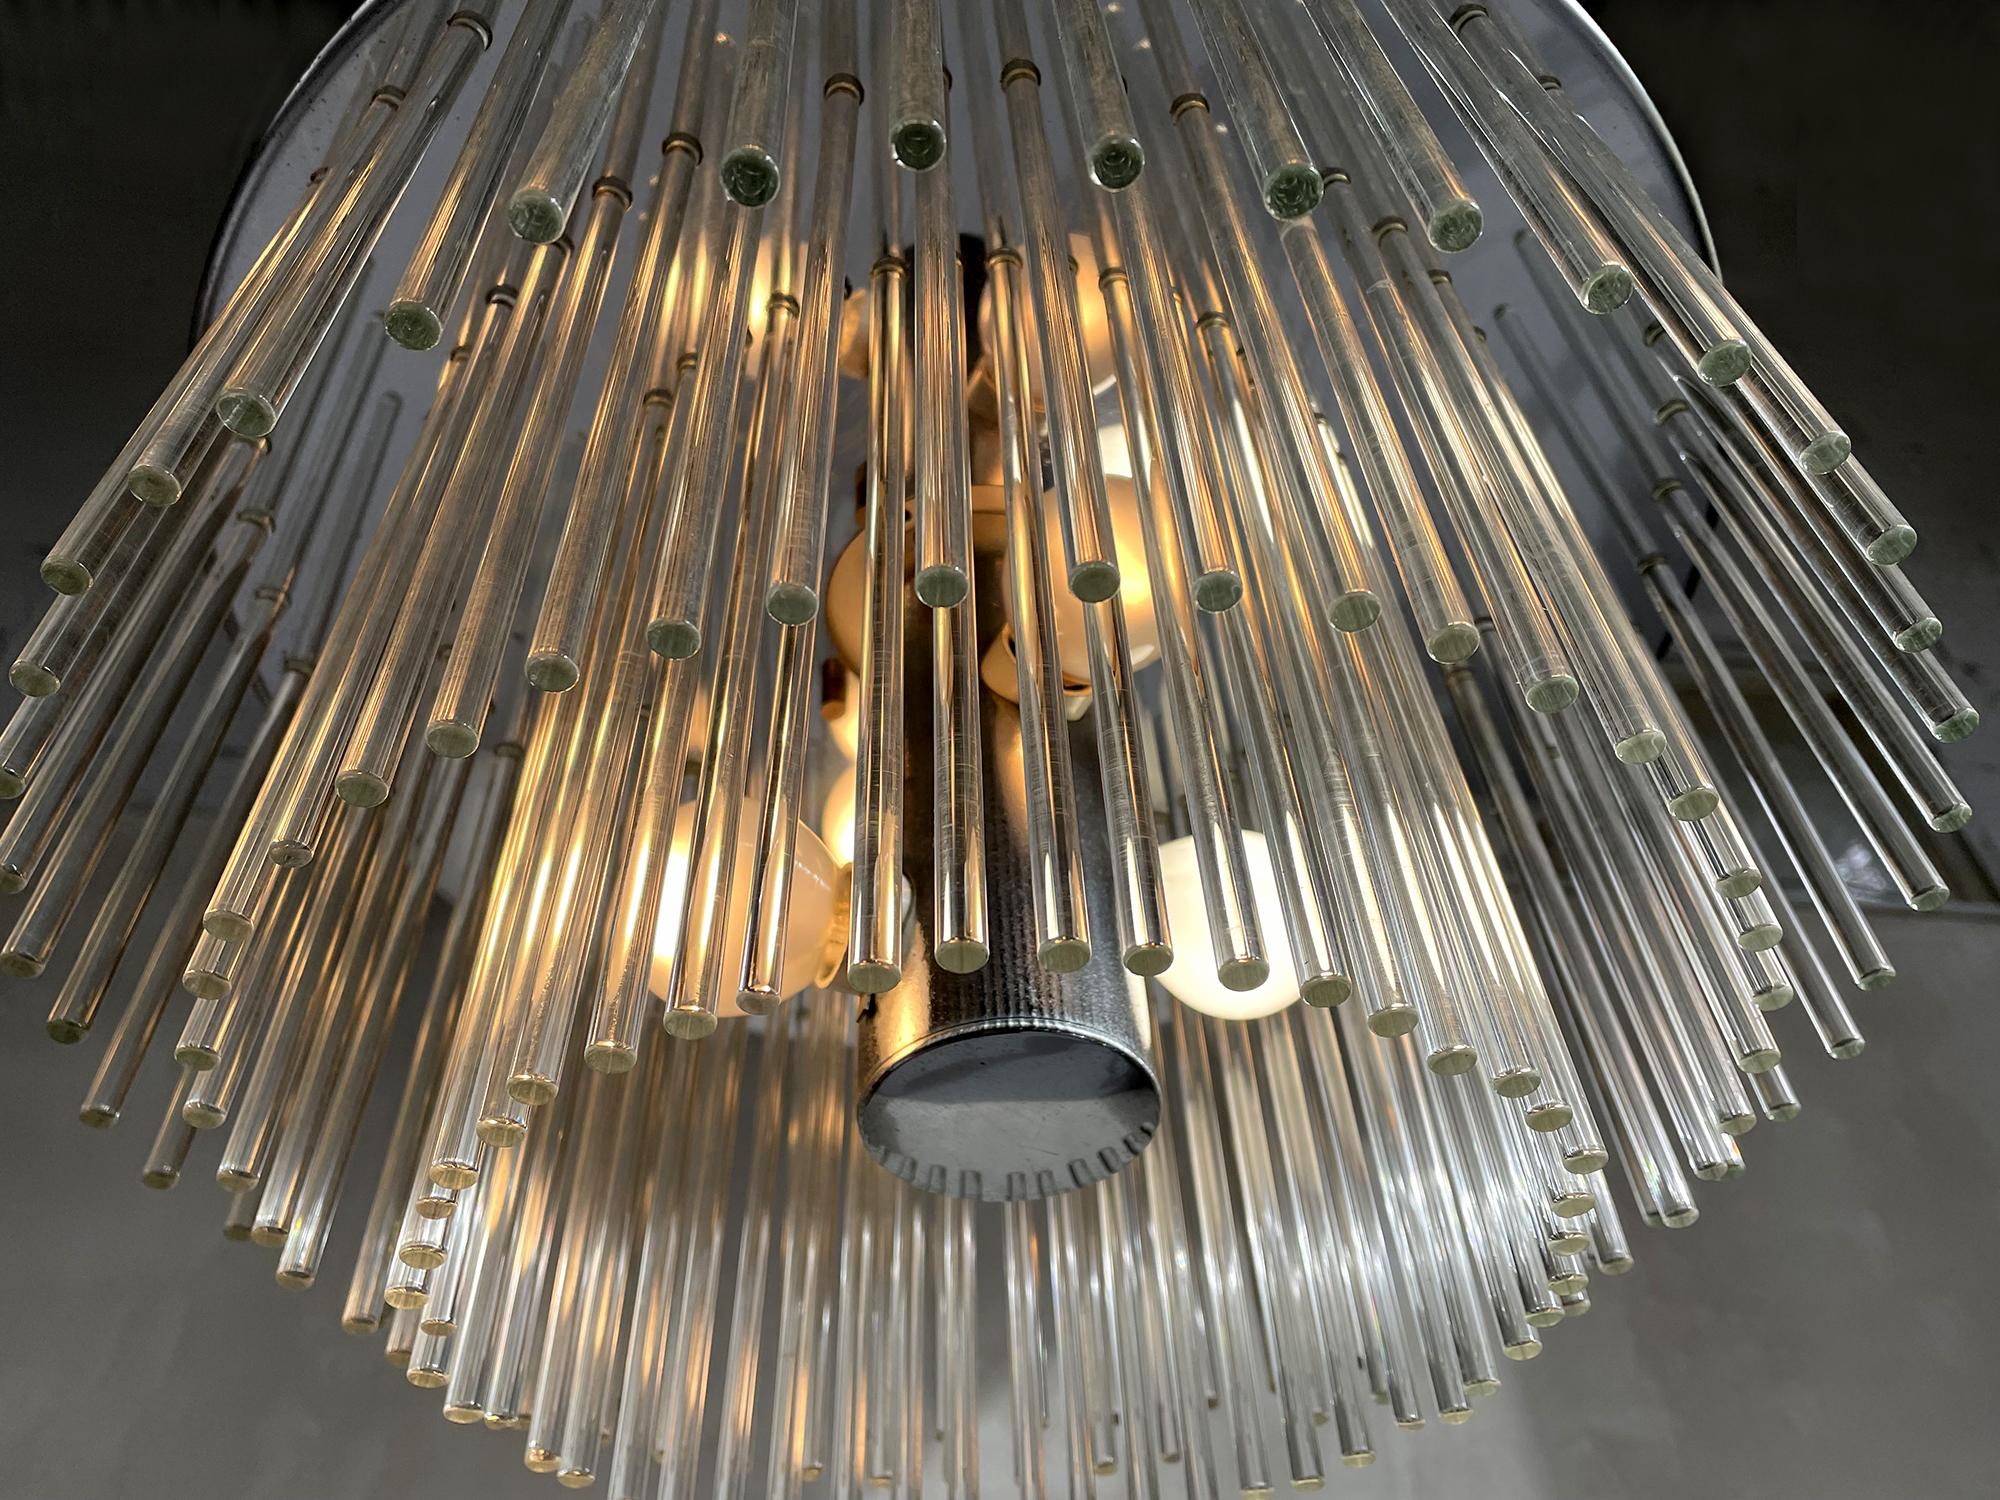 Ceiling lamp signed Sciolari in chromed metal and glass tubes, Italy 1970. The perforated plate receives 150 transparent glass tubes, terminated at the upper end by a ball. There are three sizes of tubes, allowing them to be arranged as desired. The